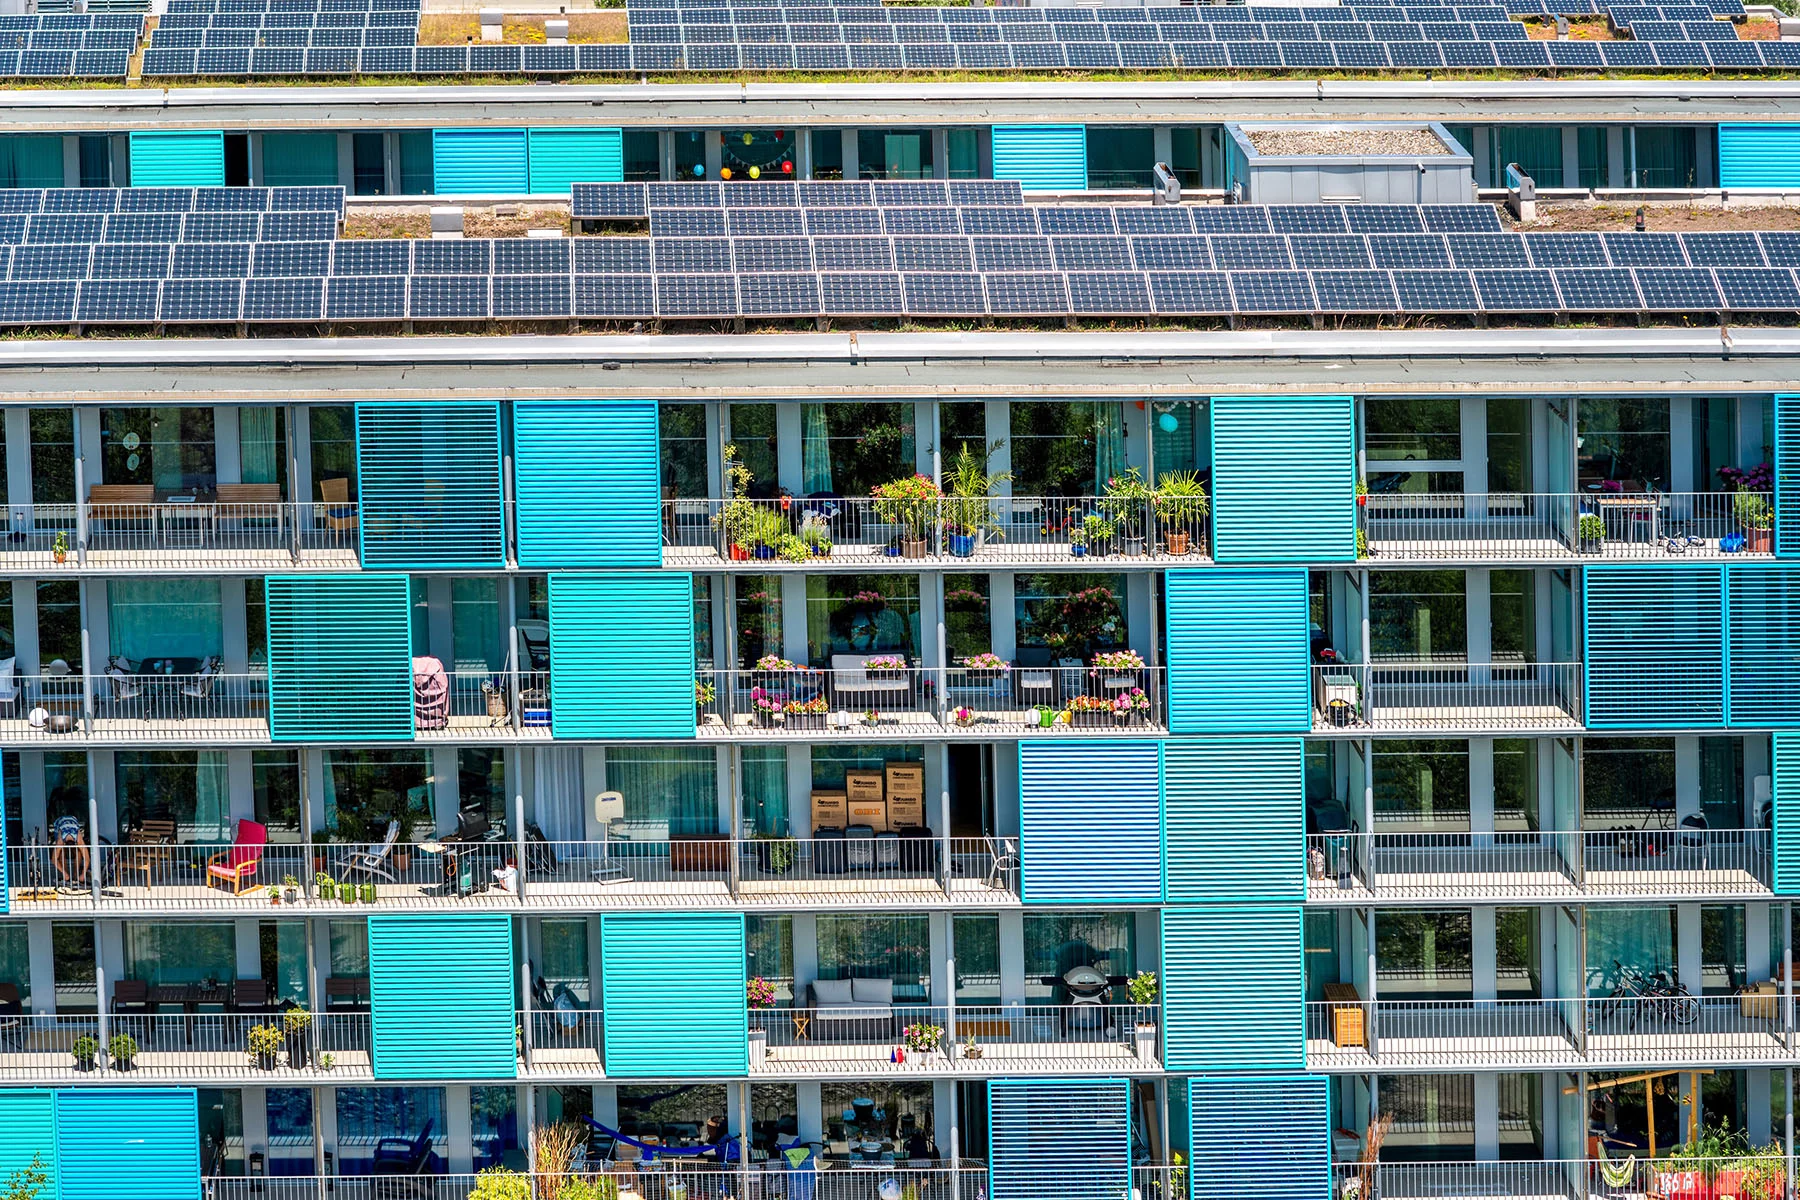 Apartments with solar panels in Zurich